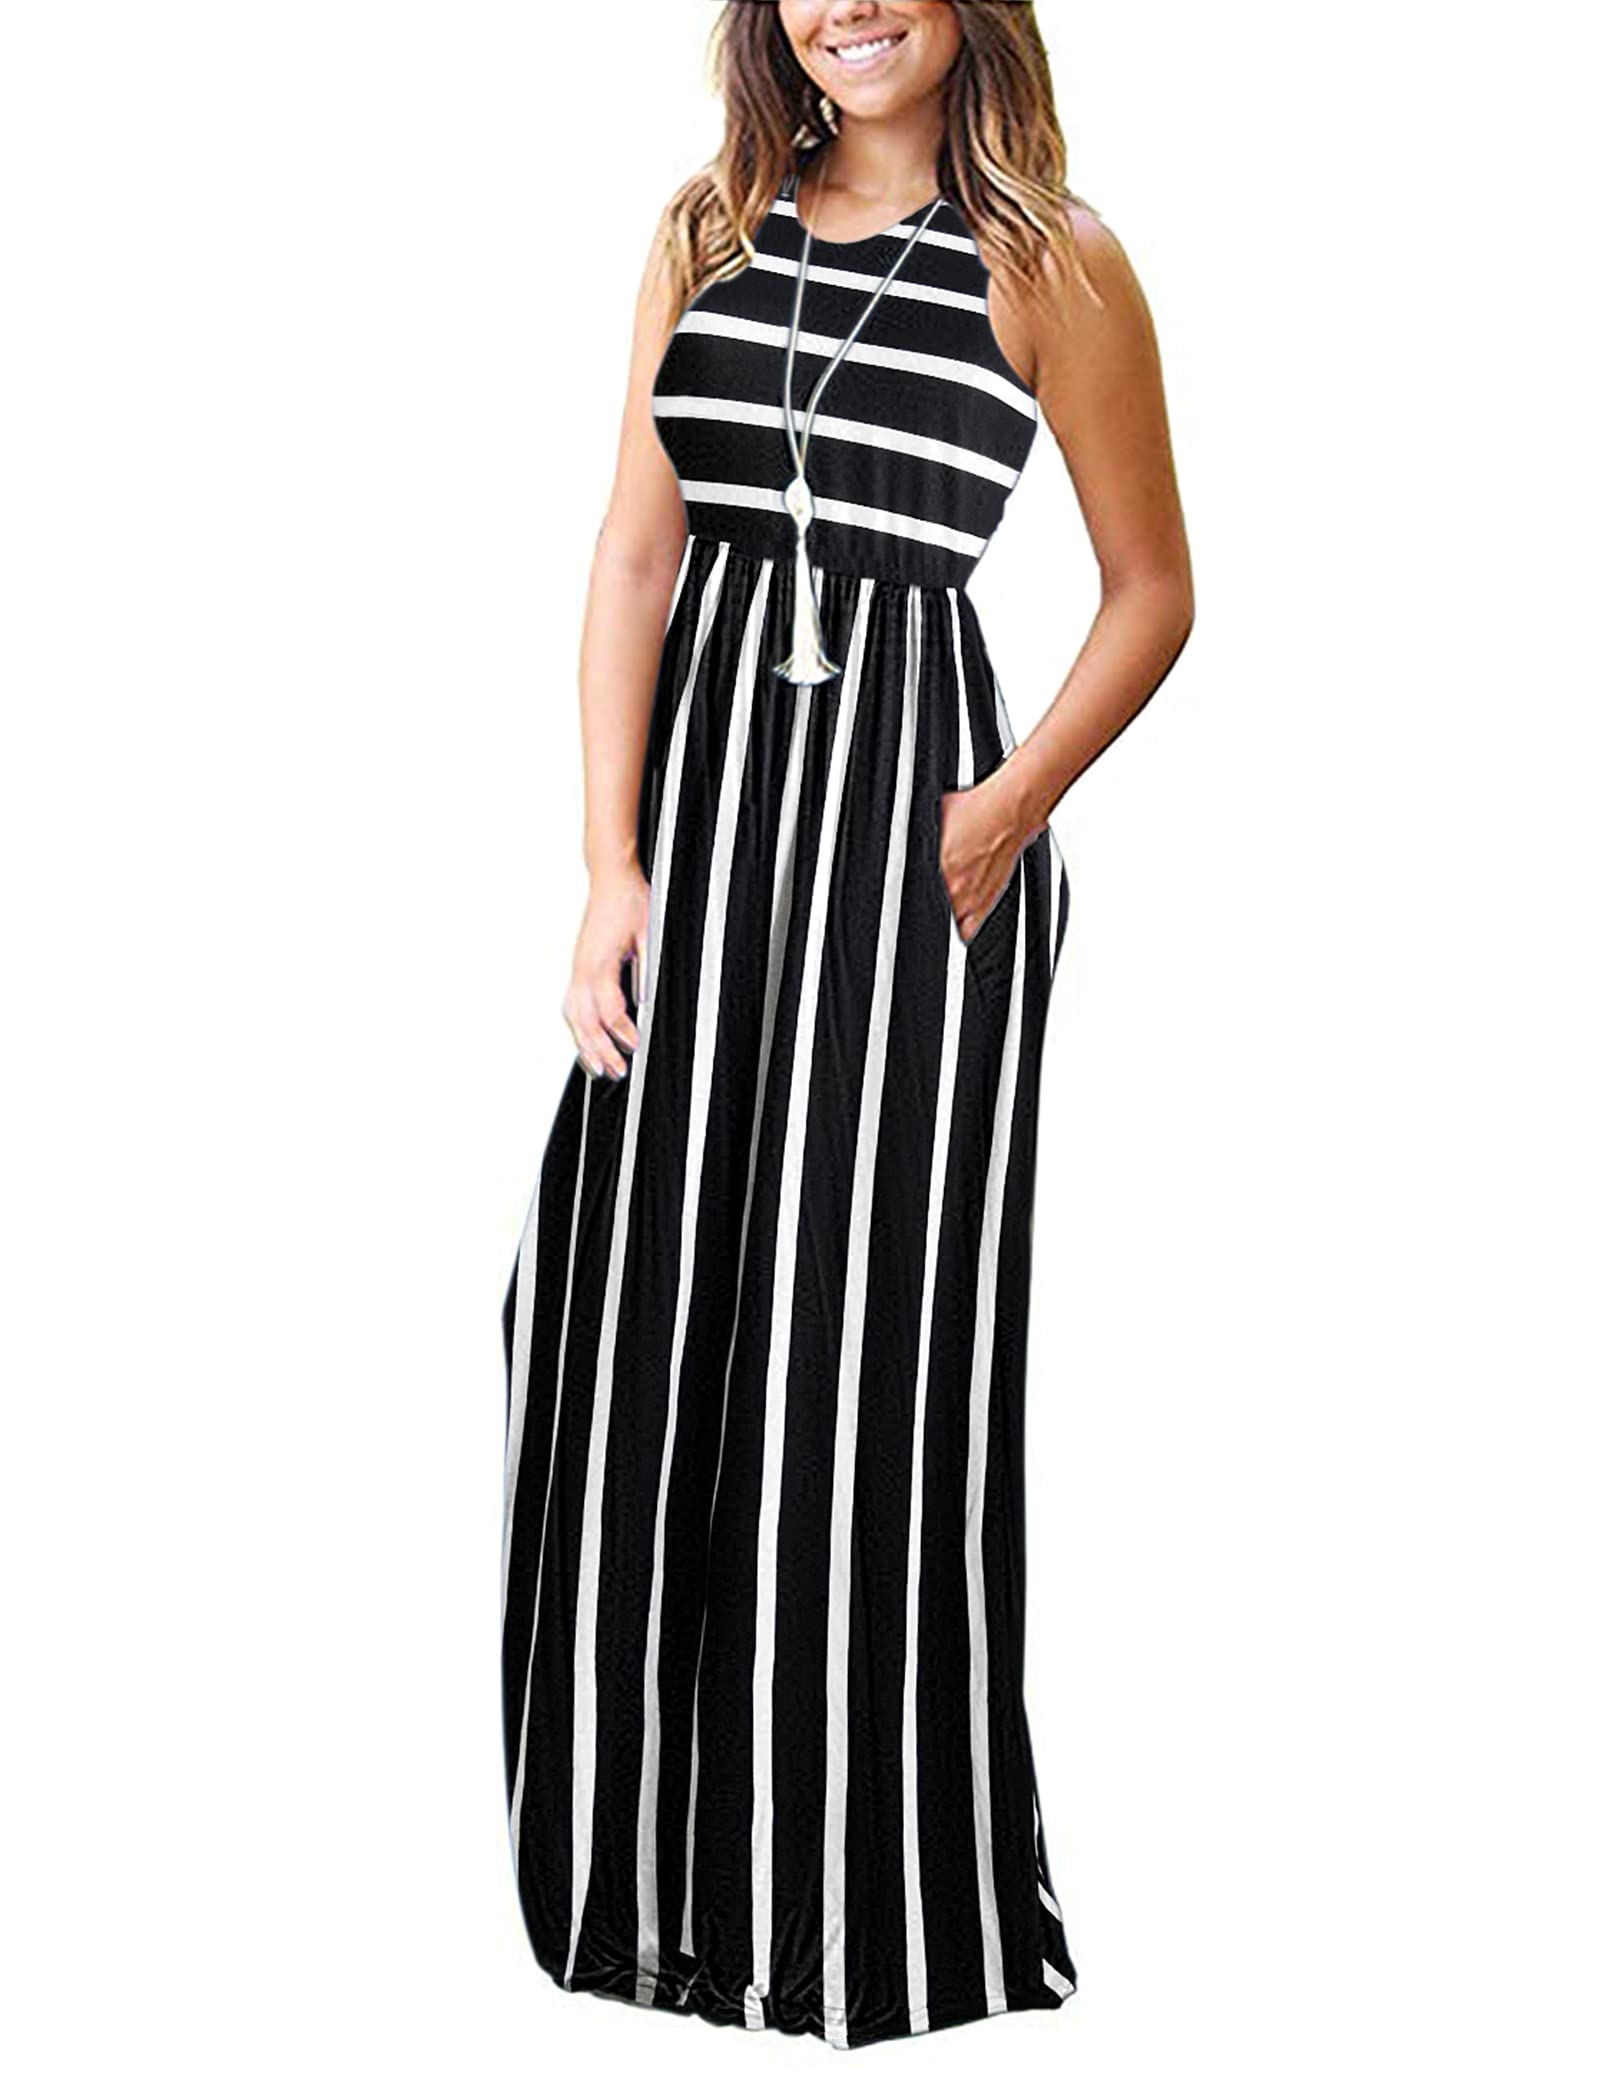 AUSELILY Women's Summer Sleeveless Loose Plain Maxi Dress Casual Long Dress with Pockets(XS,Black White Stripes)